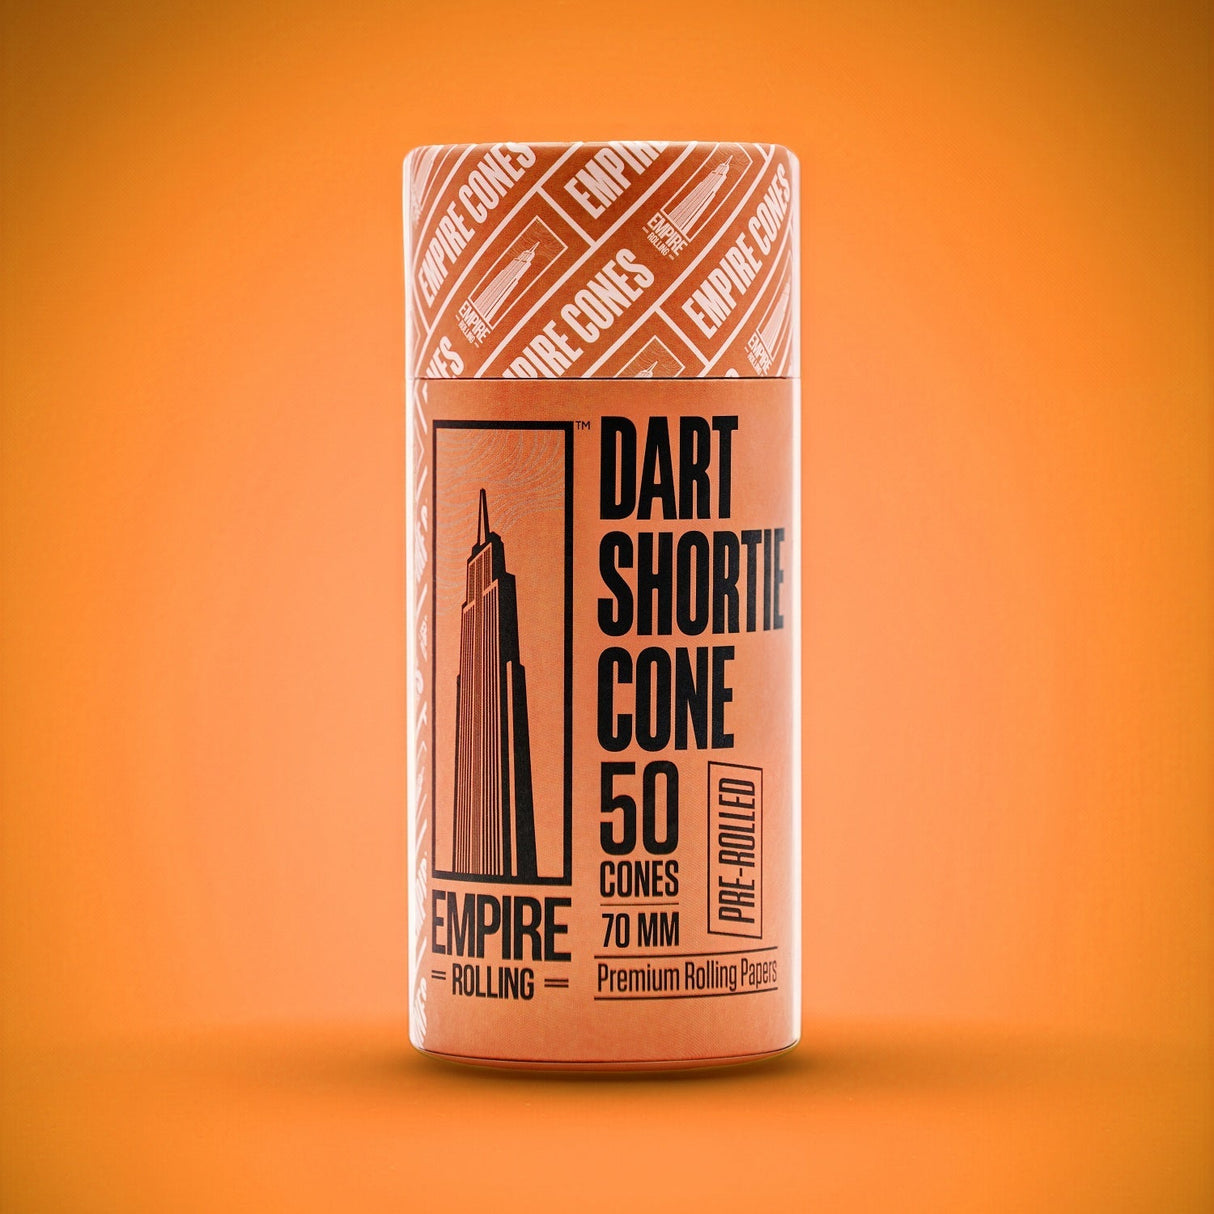 Empire Rolling Papers Ultra Smooth Dart Cones 50 Count pack front view on orange background